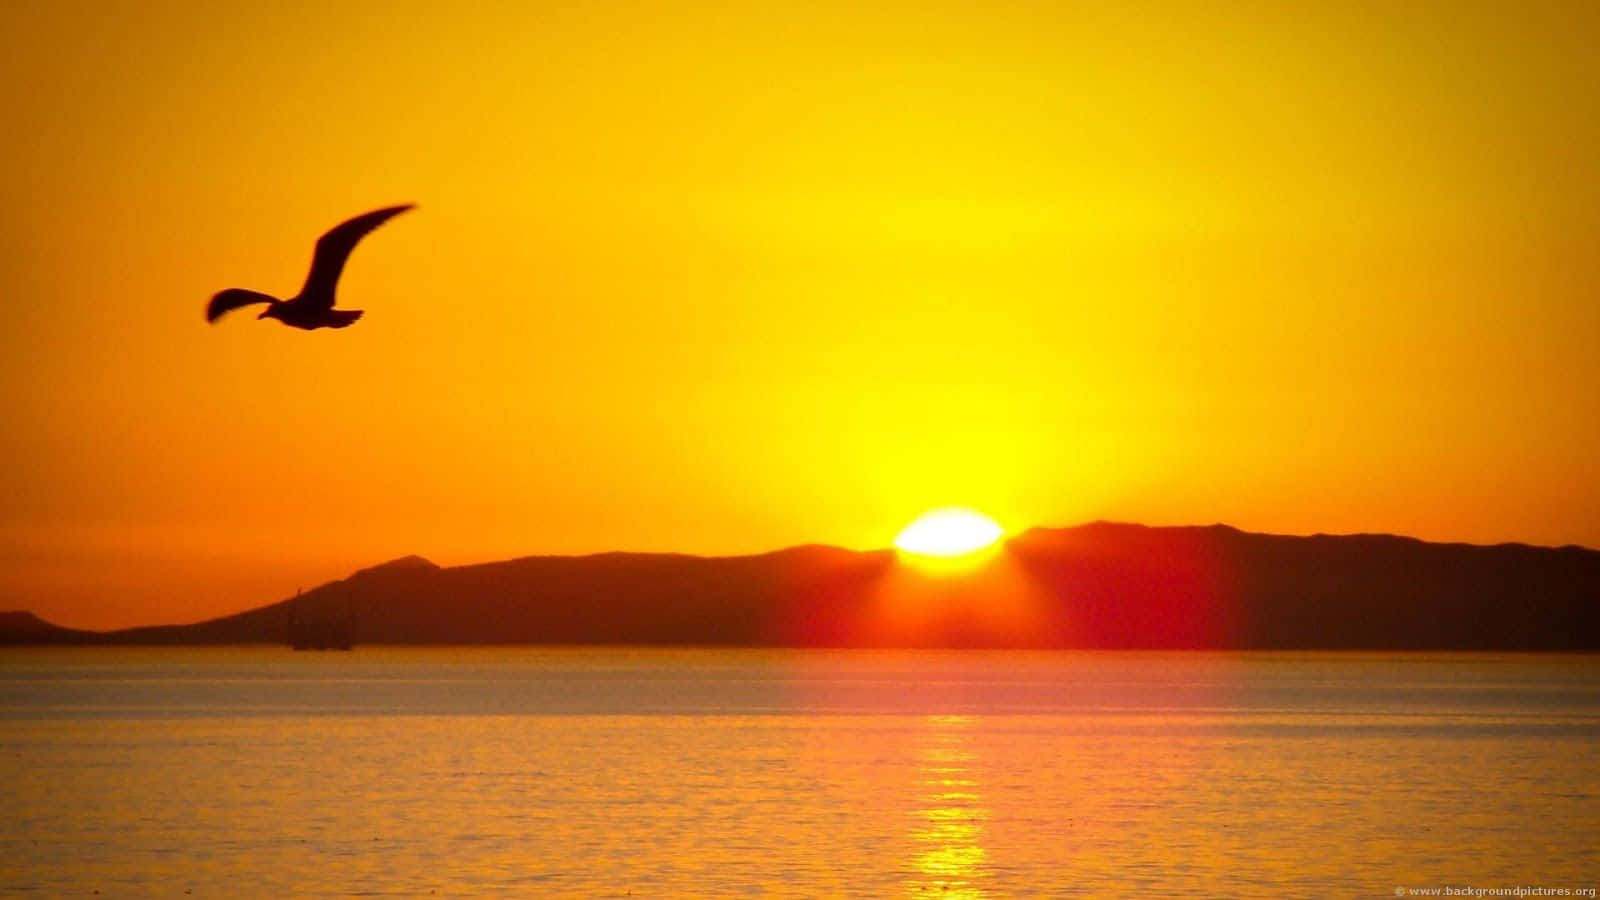 "Harness the beauty of the sunrise with the Sunrise Desktop." Wallpaper